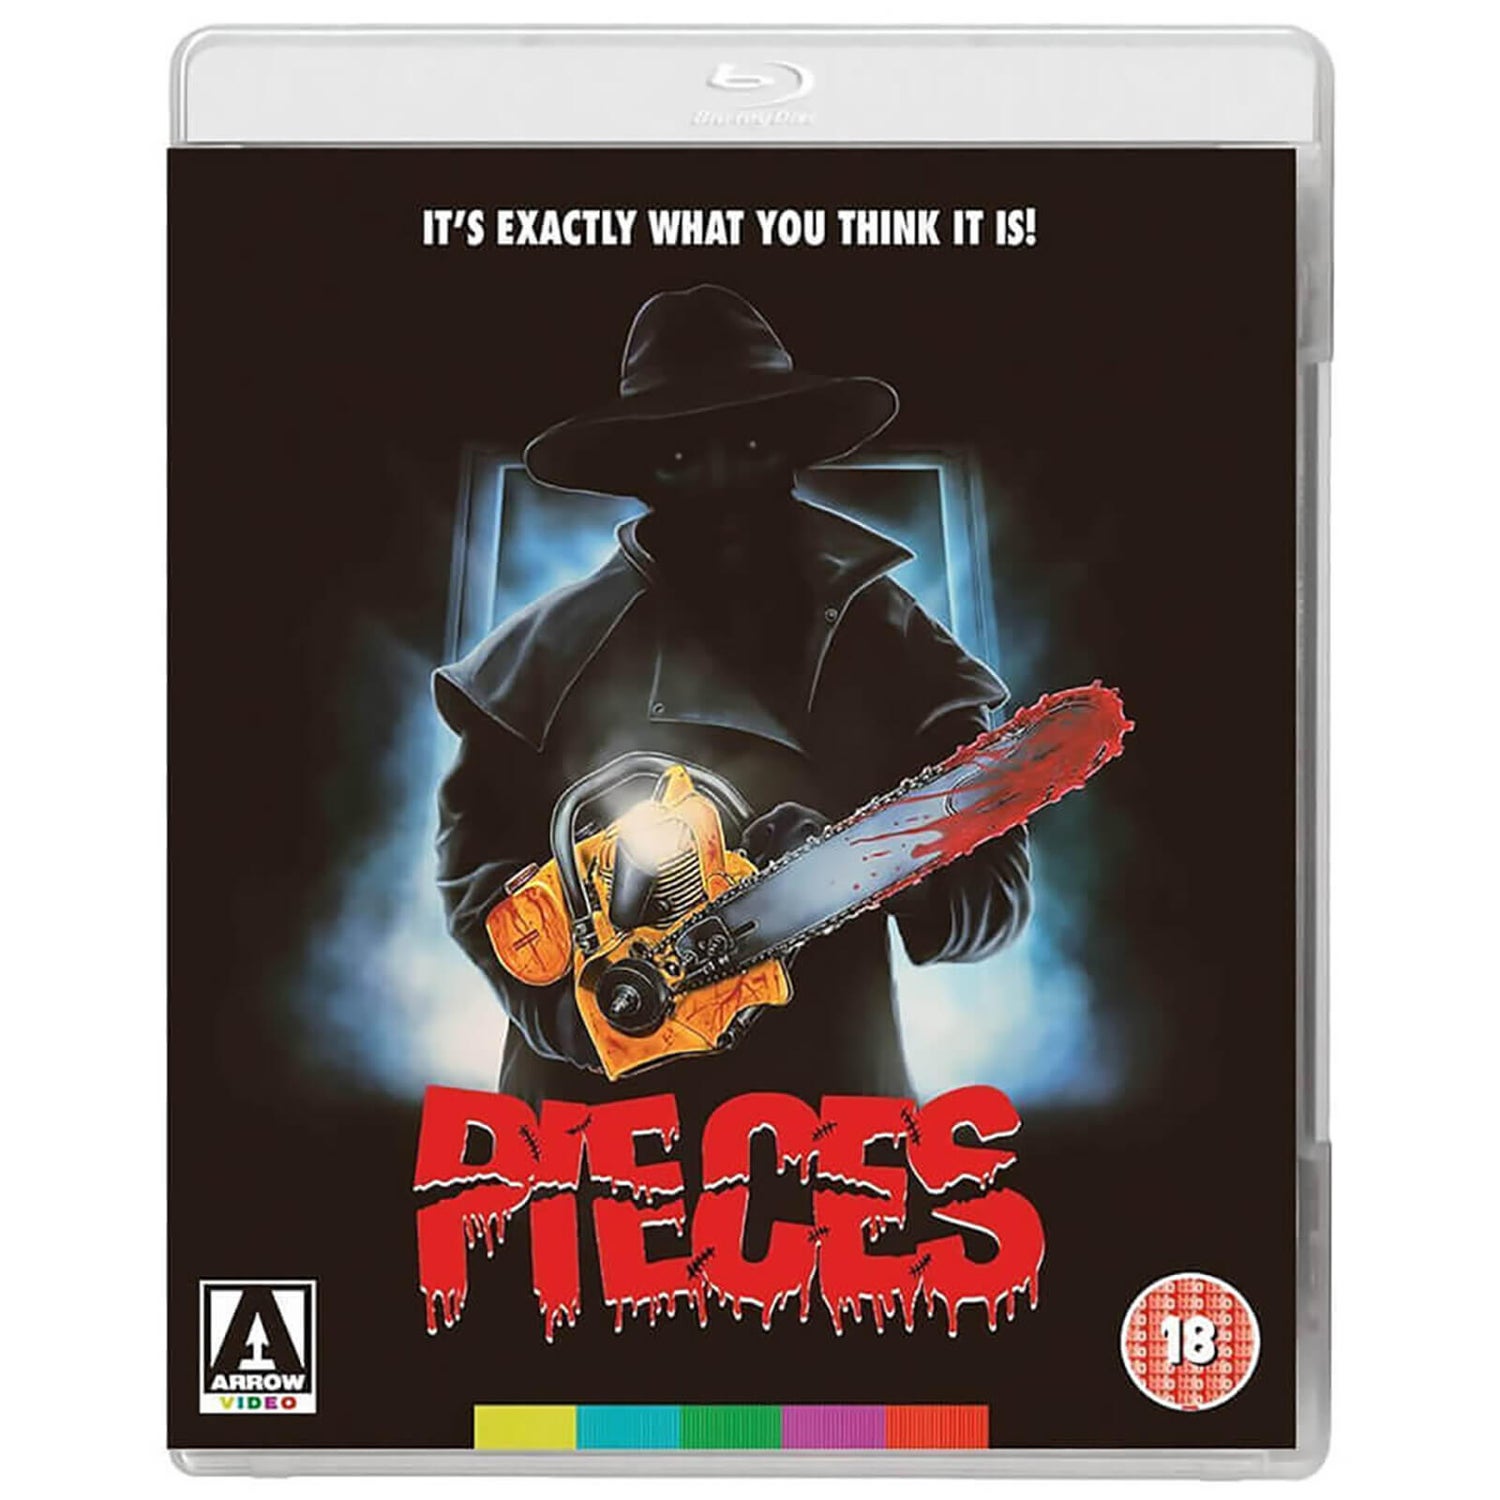 Pieces Blu-ray